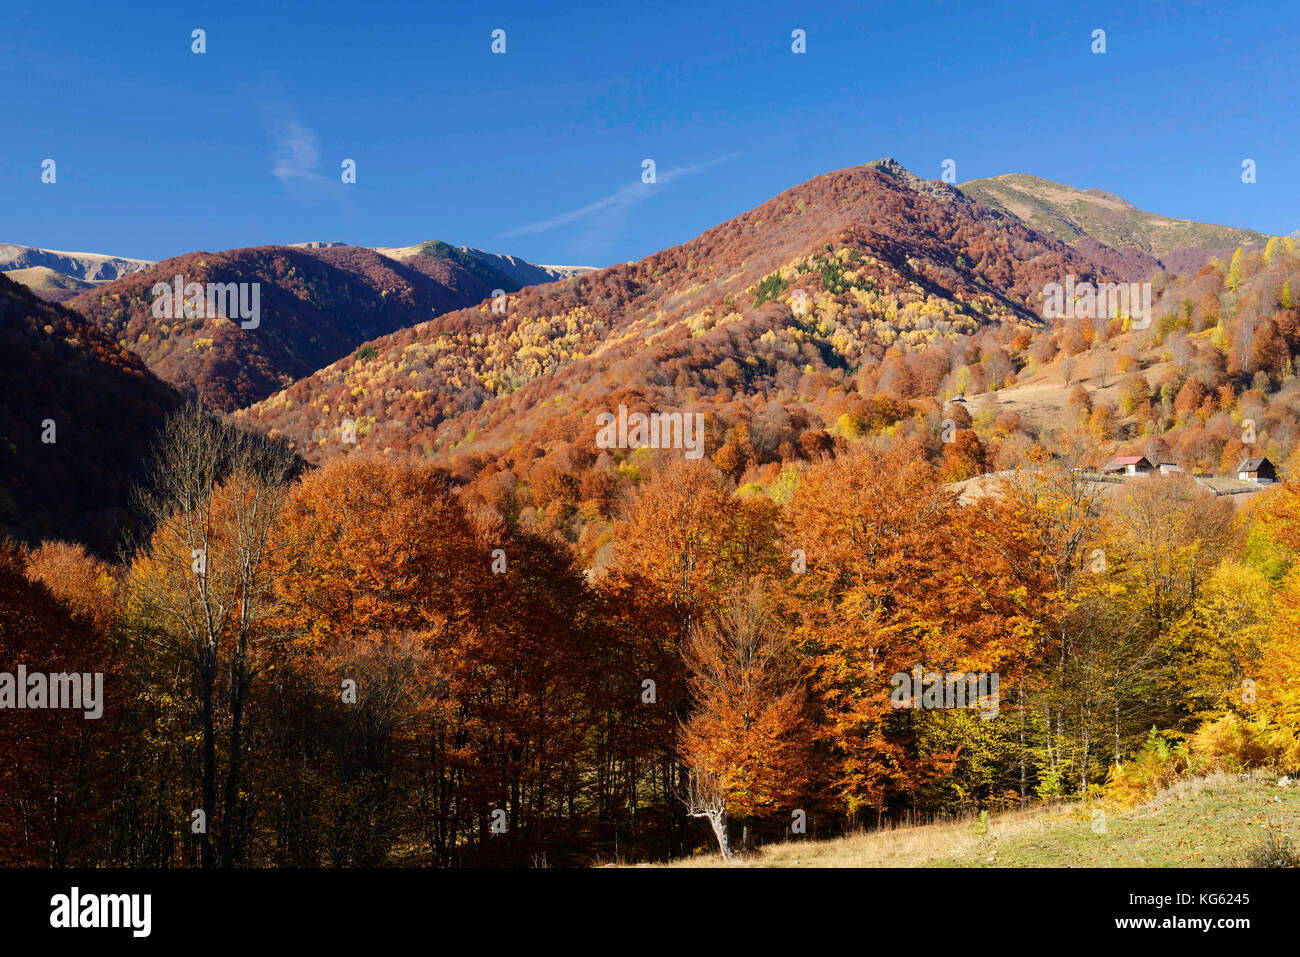 Domogled - Valea Cernei National Park / Romania: Largely unprotected and threatened primary forest in UNESCO World Heritage buffer zone (Cernisoara). Stock Photo